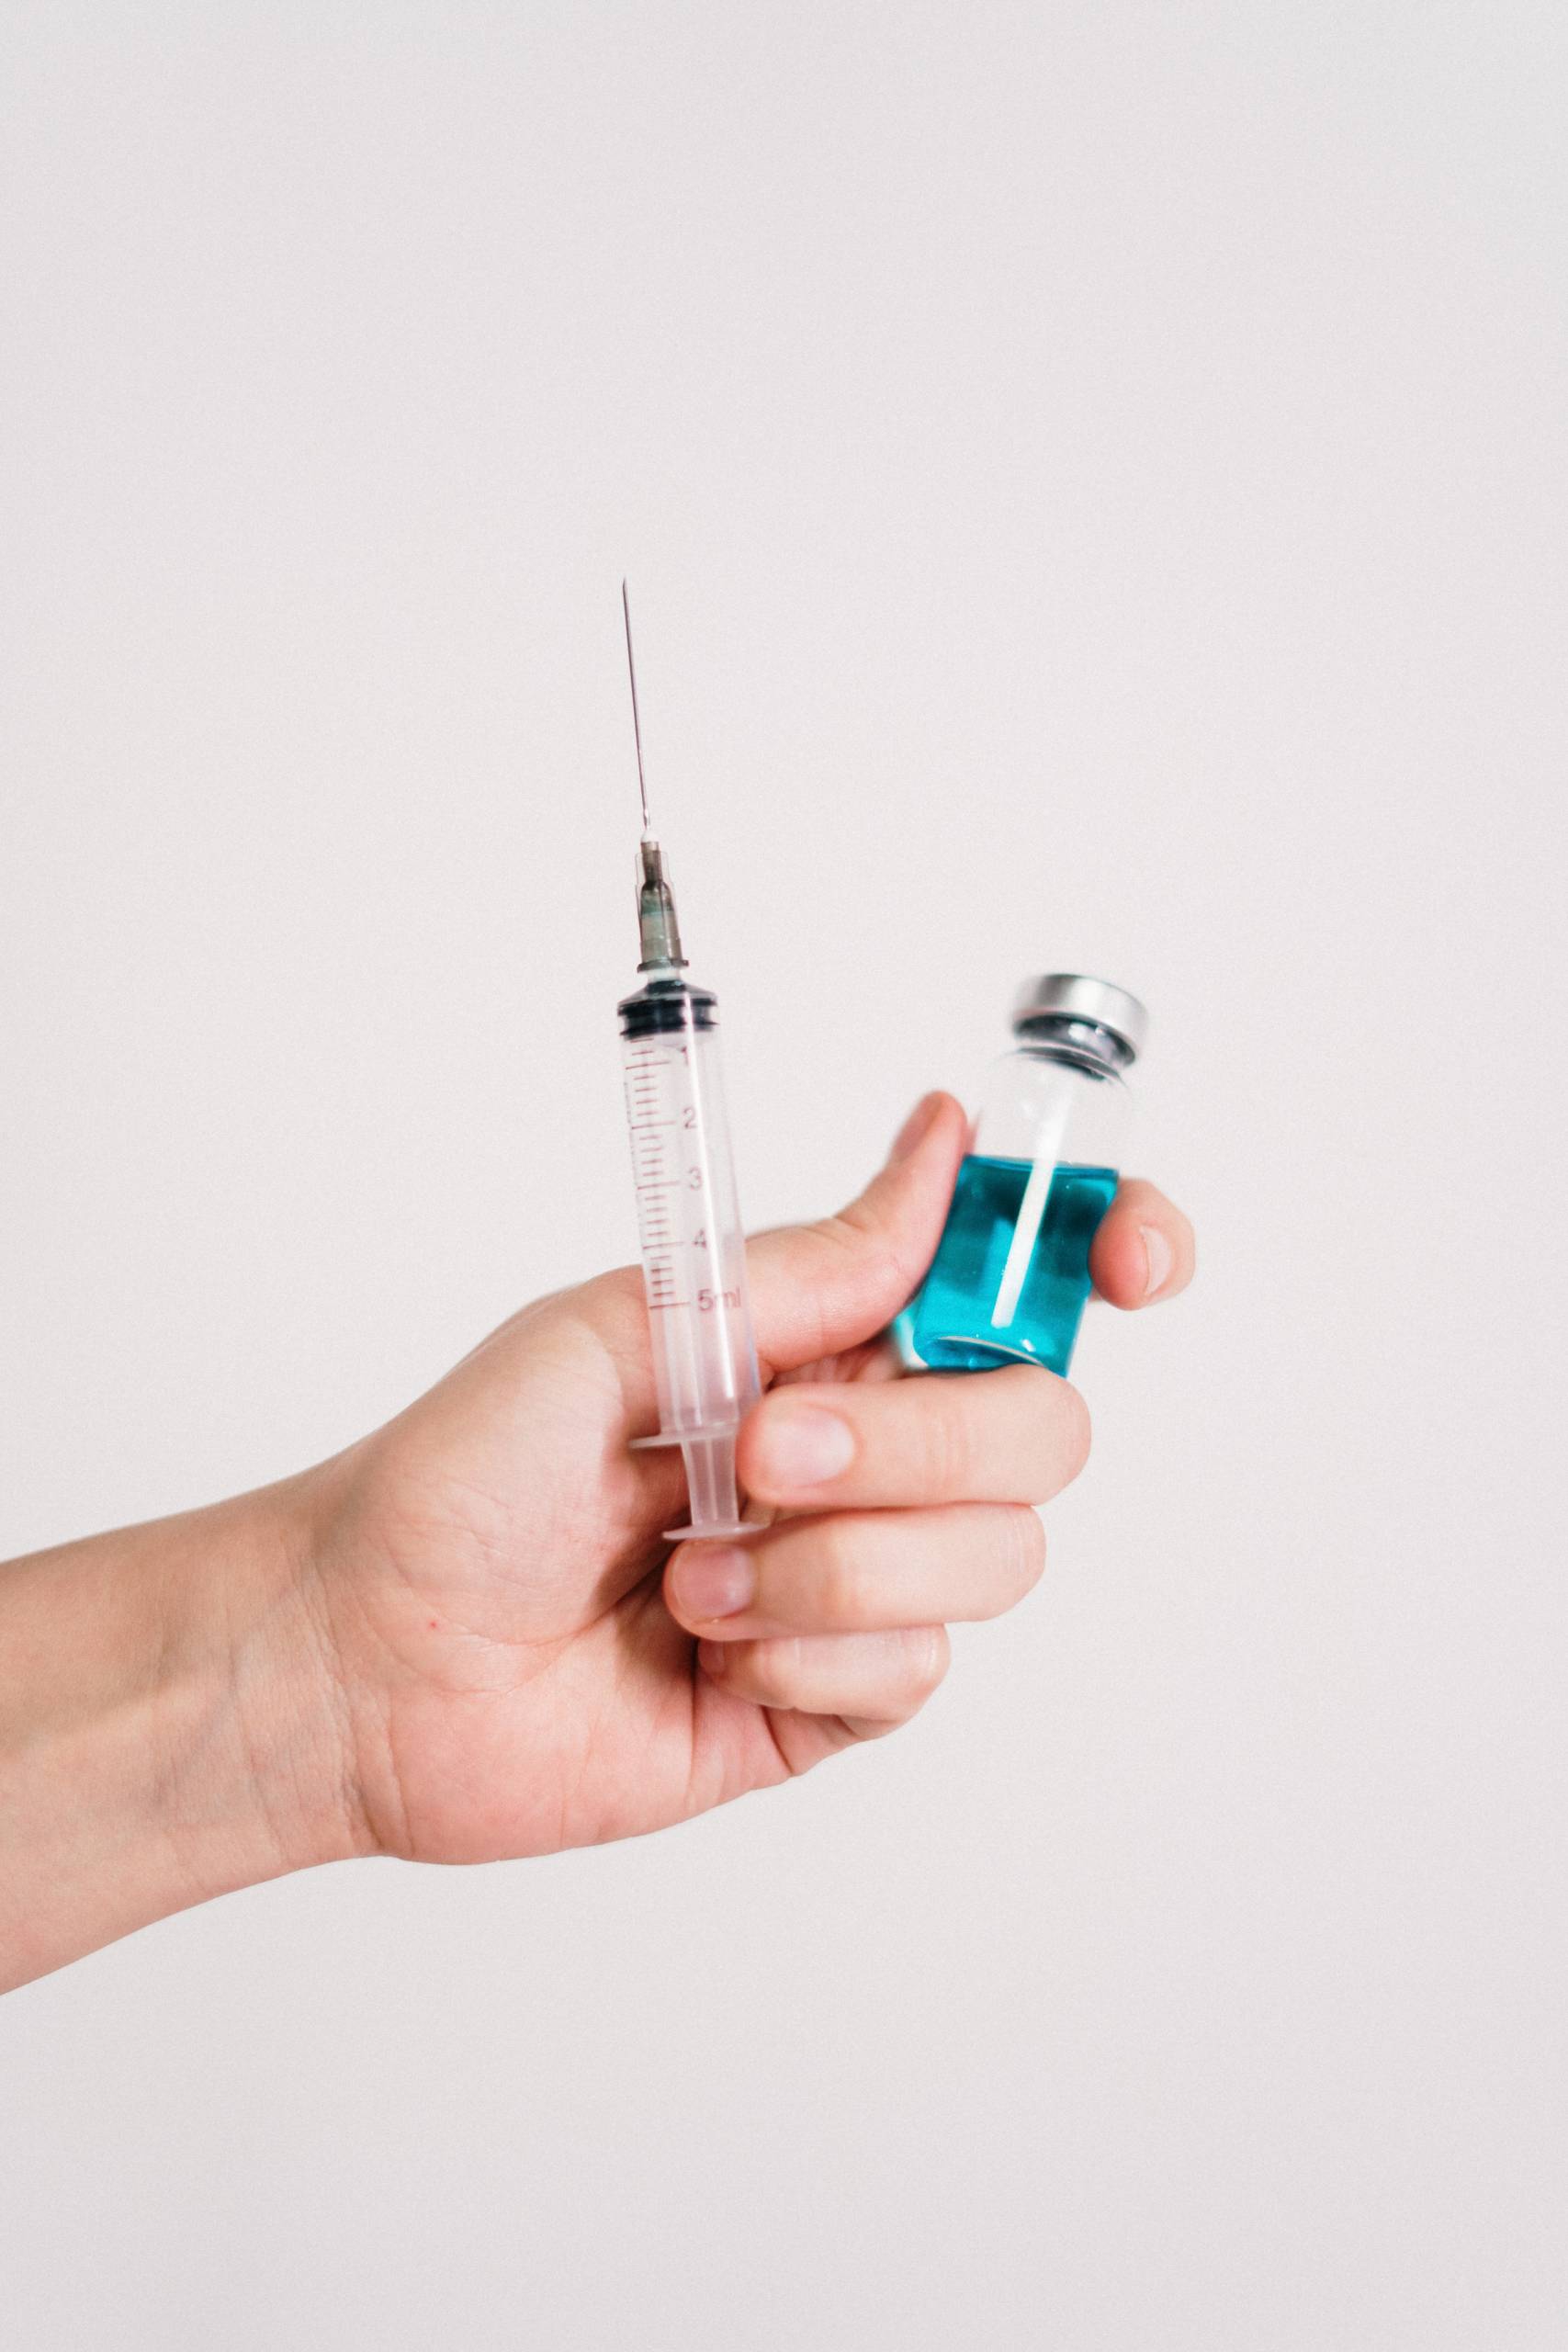 The First Vaccine For Coronavirus-from Russia?